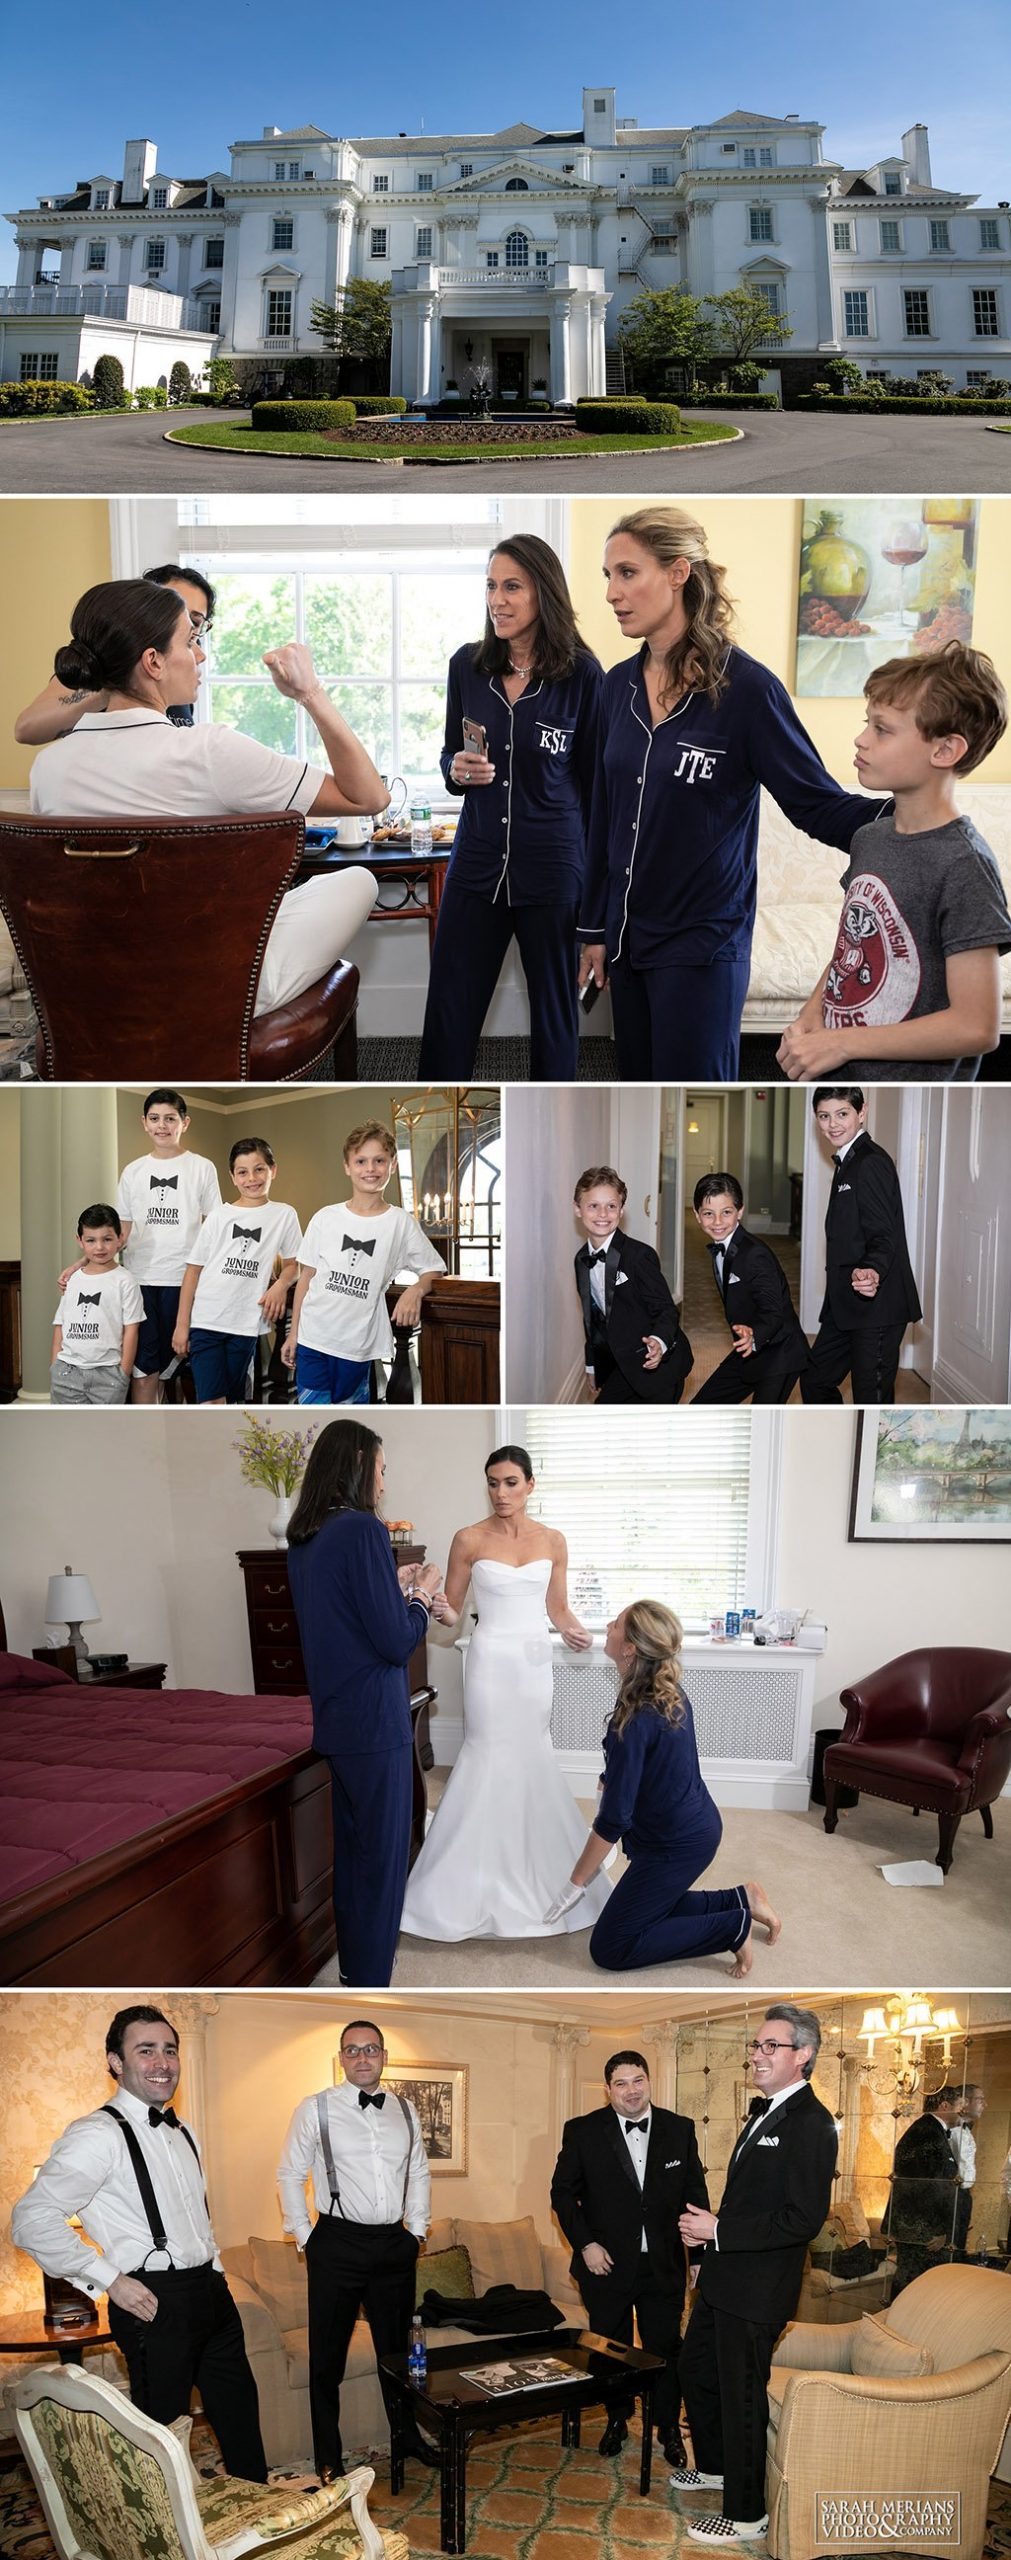 CHECK OUT THIS FAMILY CELEBRATION FOR COURTNEY AND JORDAN’S WEDDING